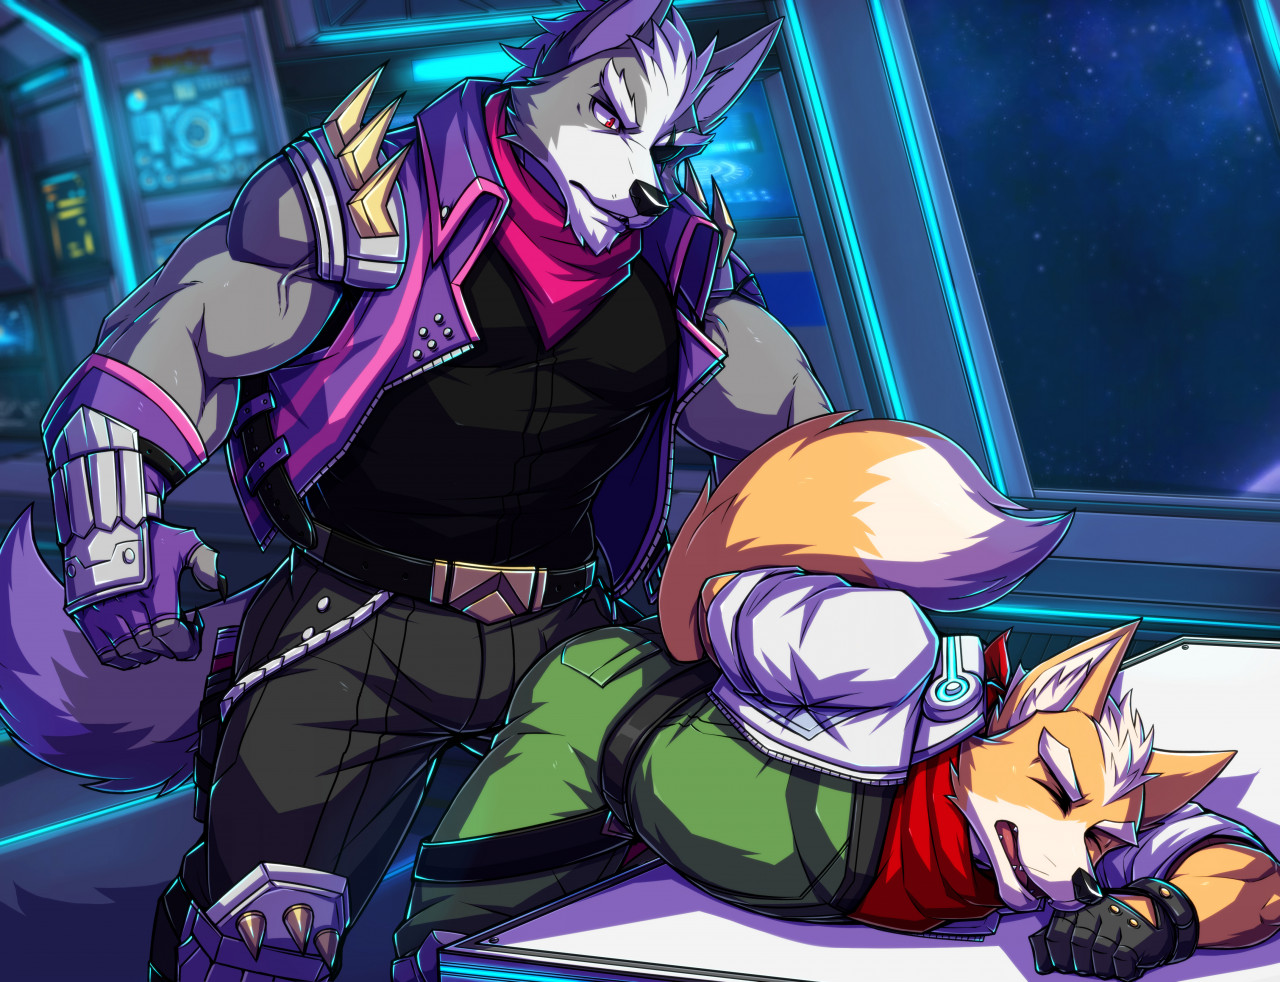 Fox mccloud x wolf o'donnell